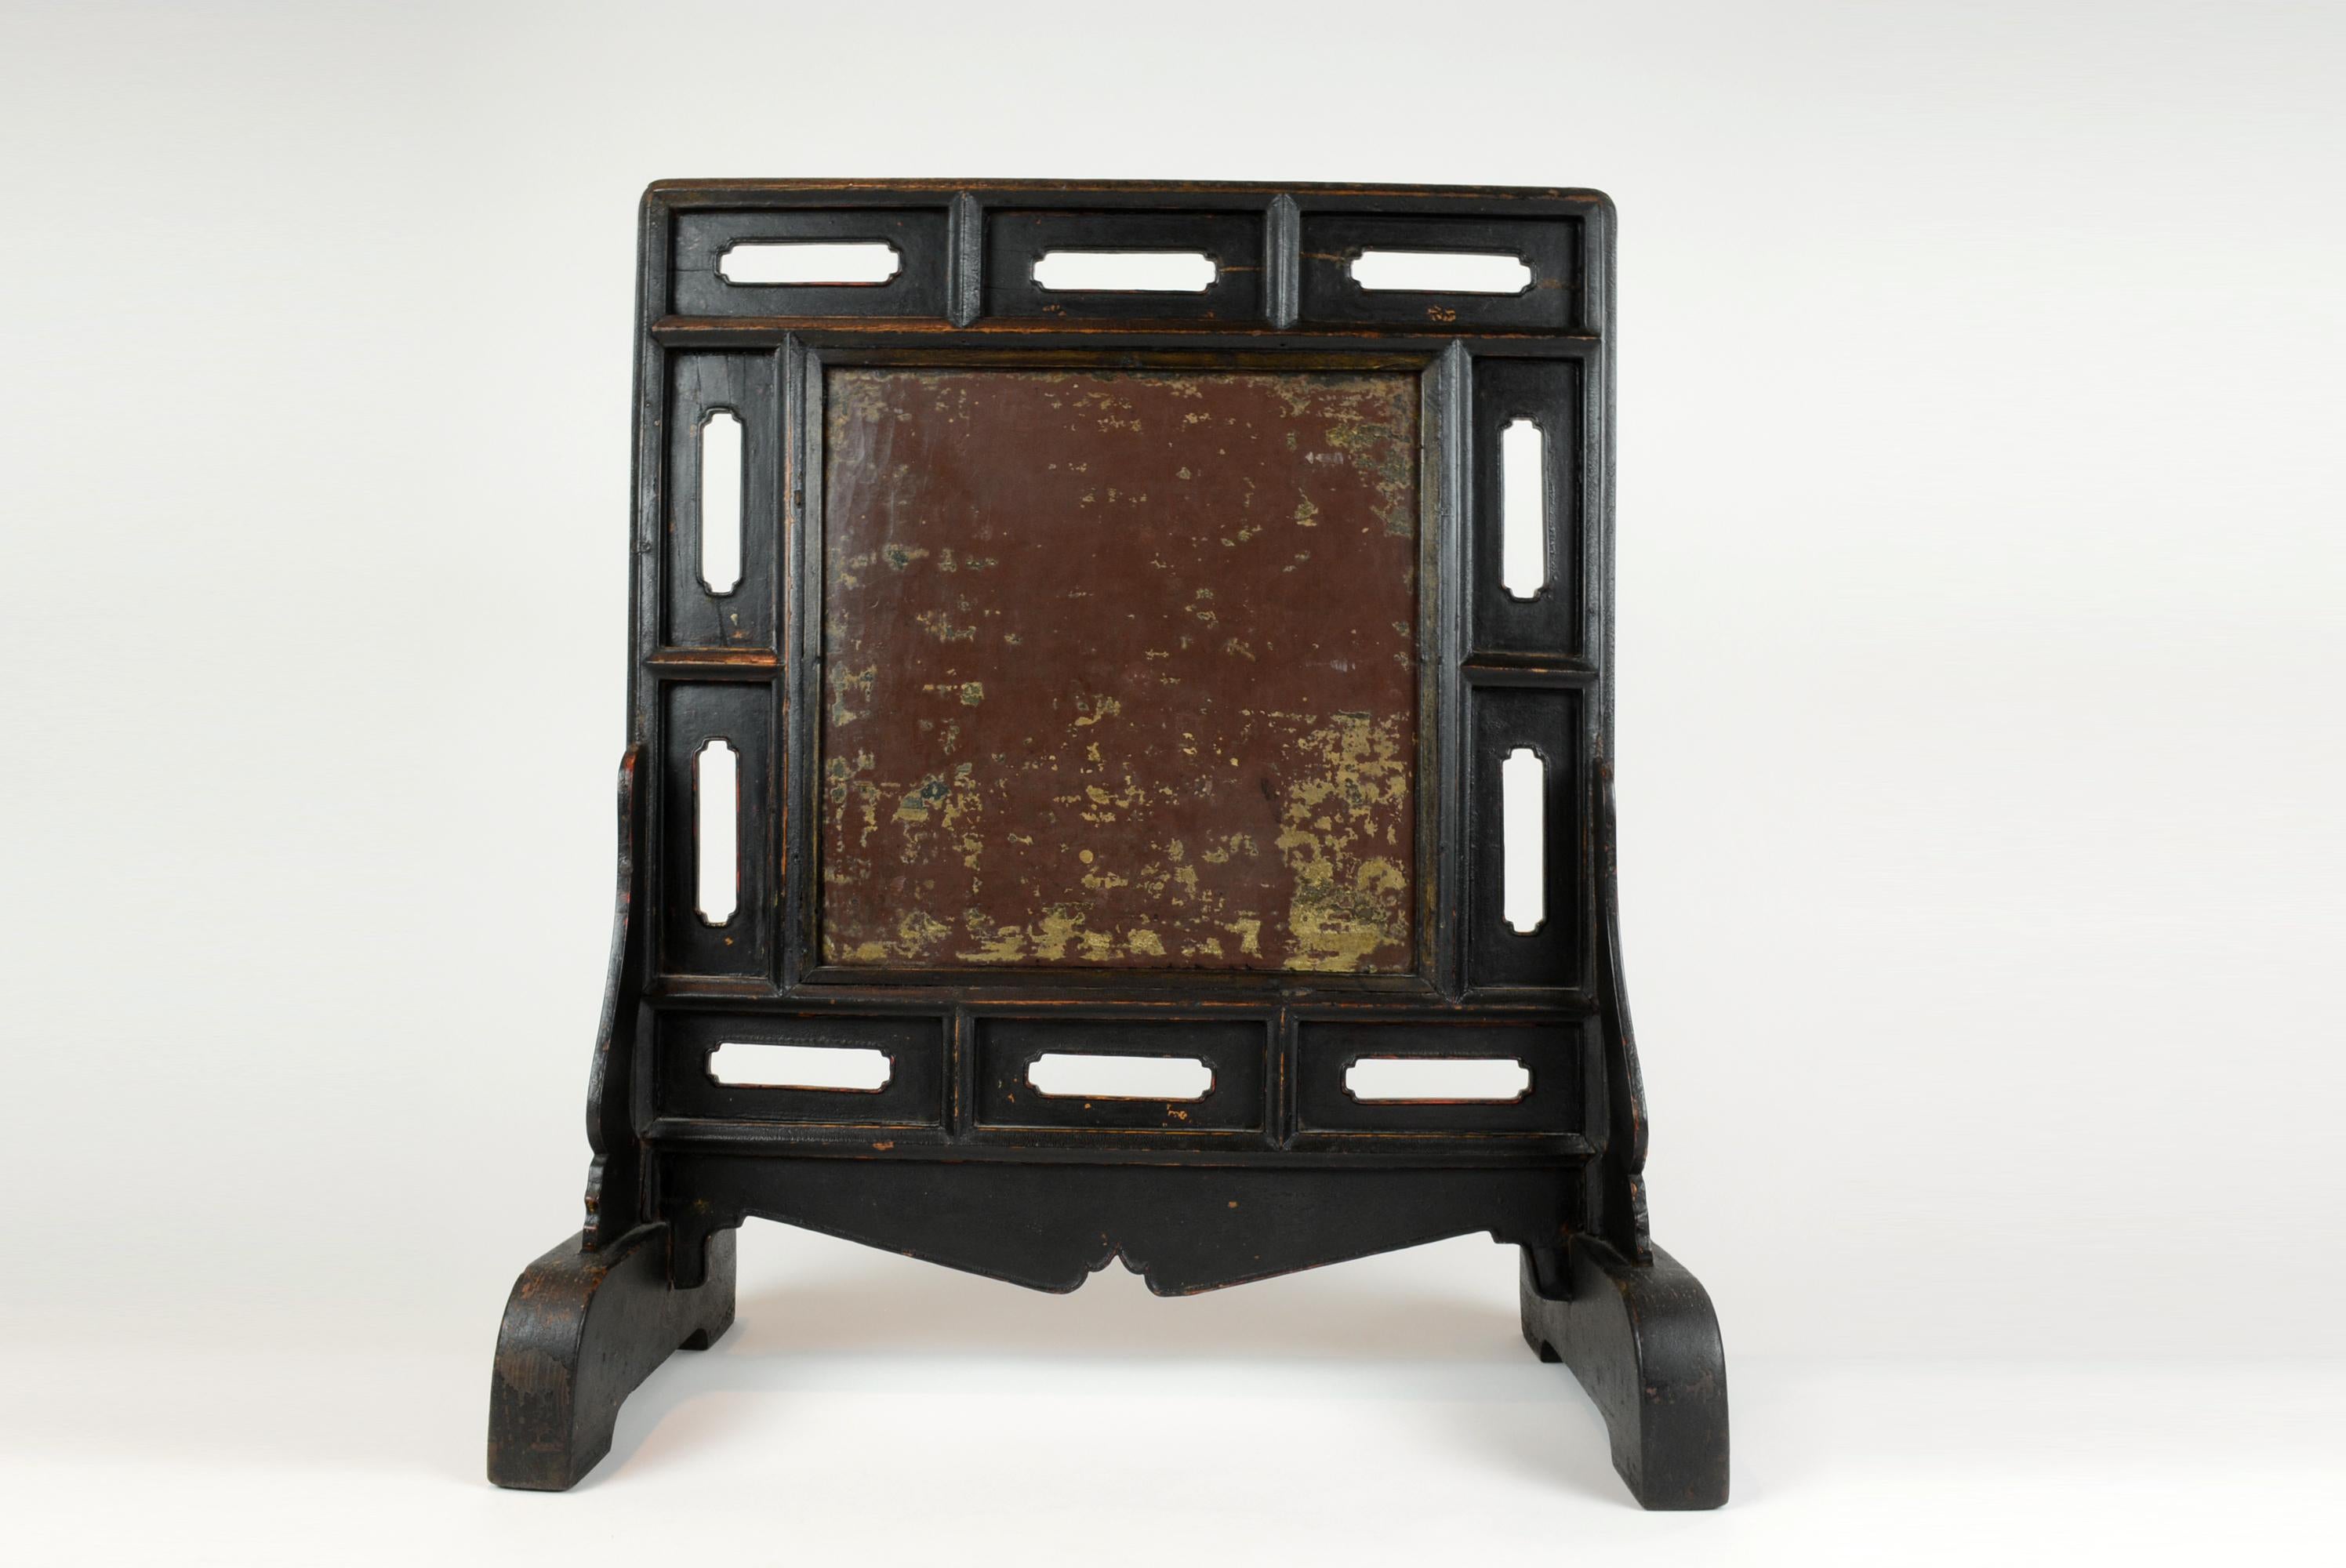 This black lacquer table screen has a multi –panel frame. Each section surrounding the stone has an elongated open begonia. The apron is cusped. The base is attached to the screen in mortise and tenon joints.
The base of this screen is 11.5 inches